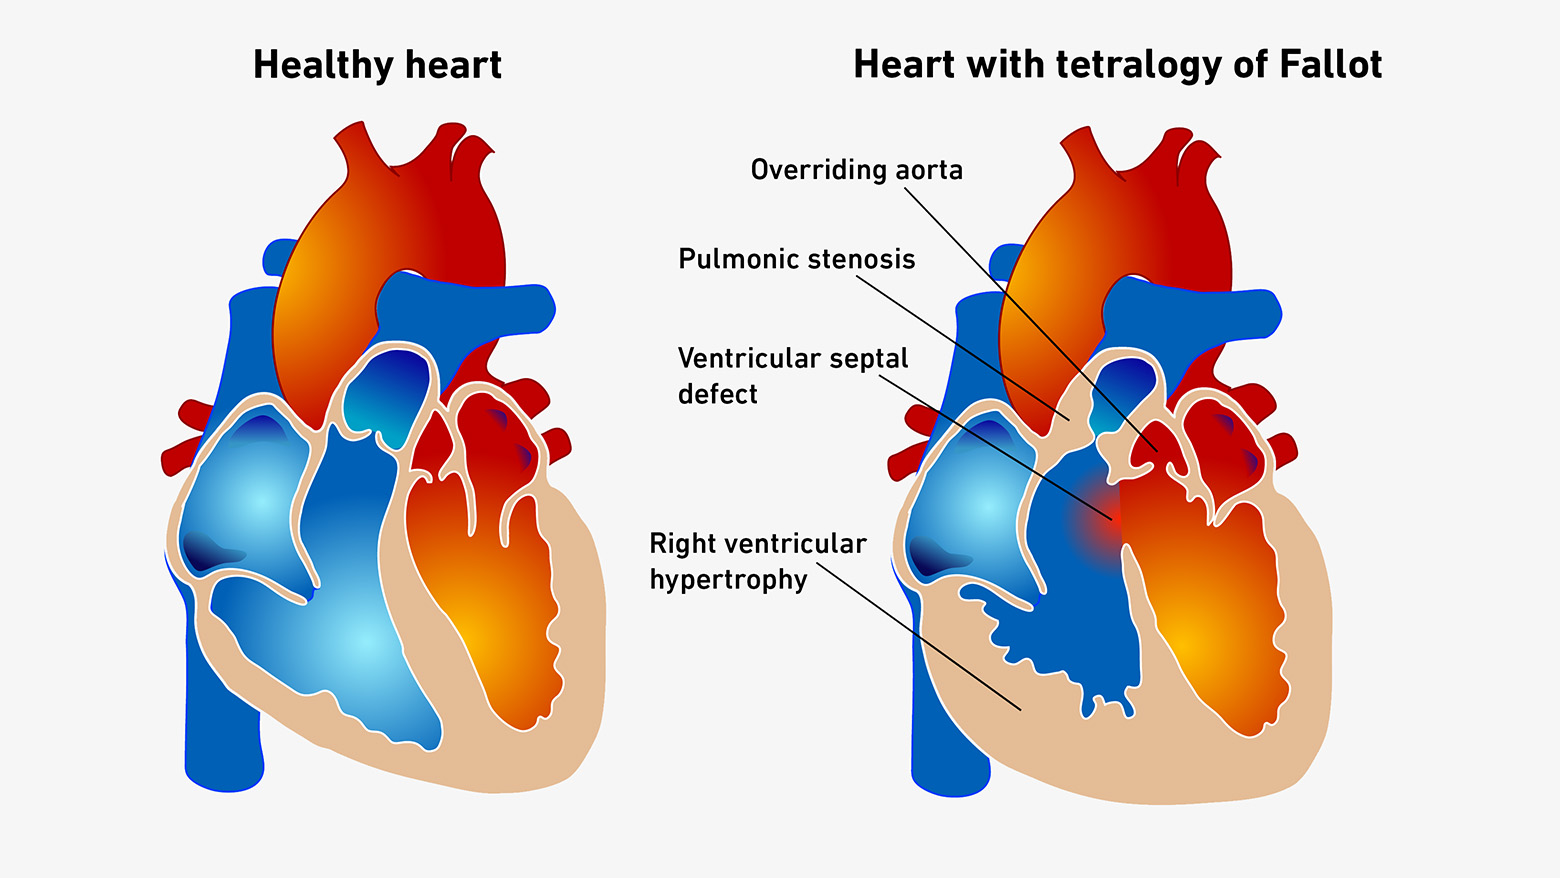 Enlarged view: Schematic representation of a healthy heart next to a heart with tetralogy of Fallot, in which the dividing wall between the two heart chambers has a hole.